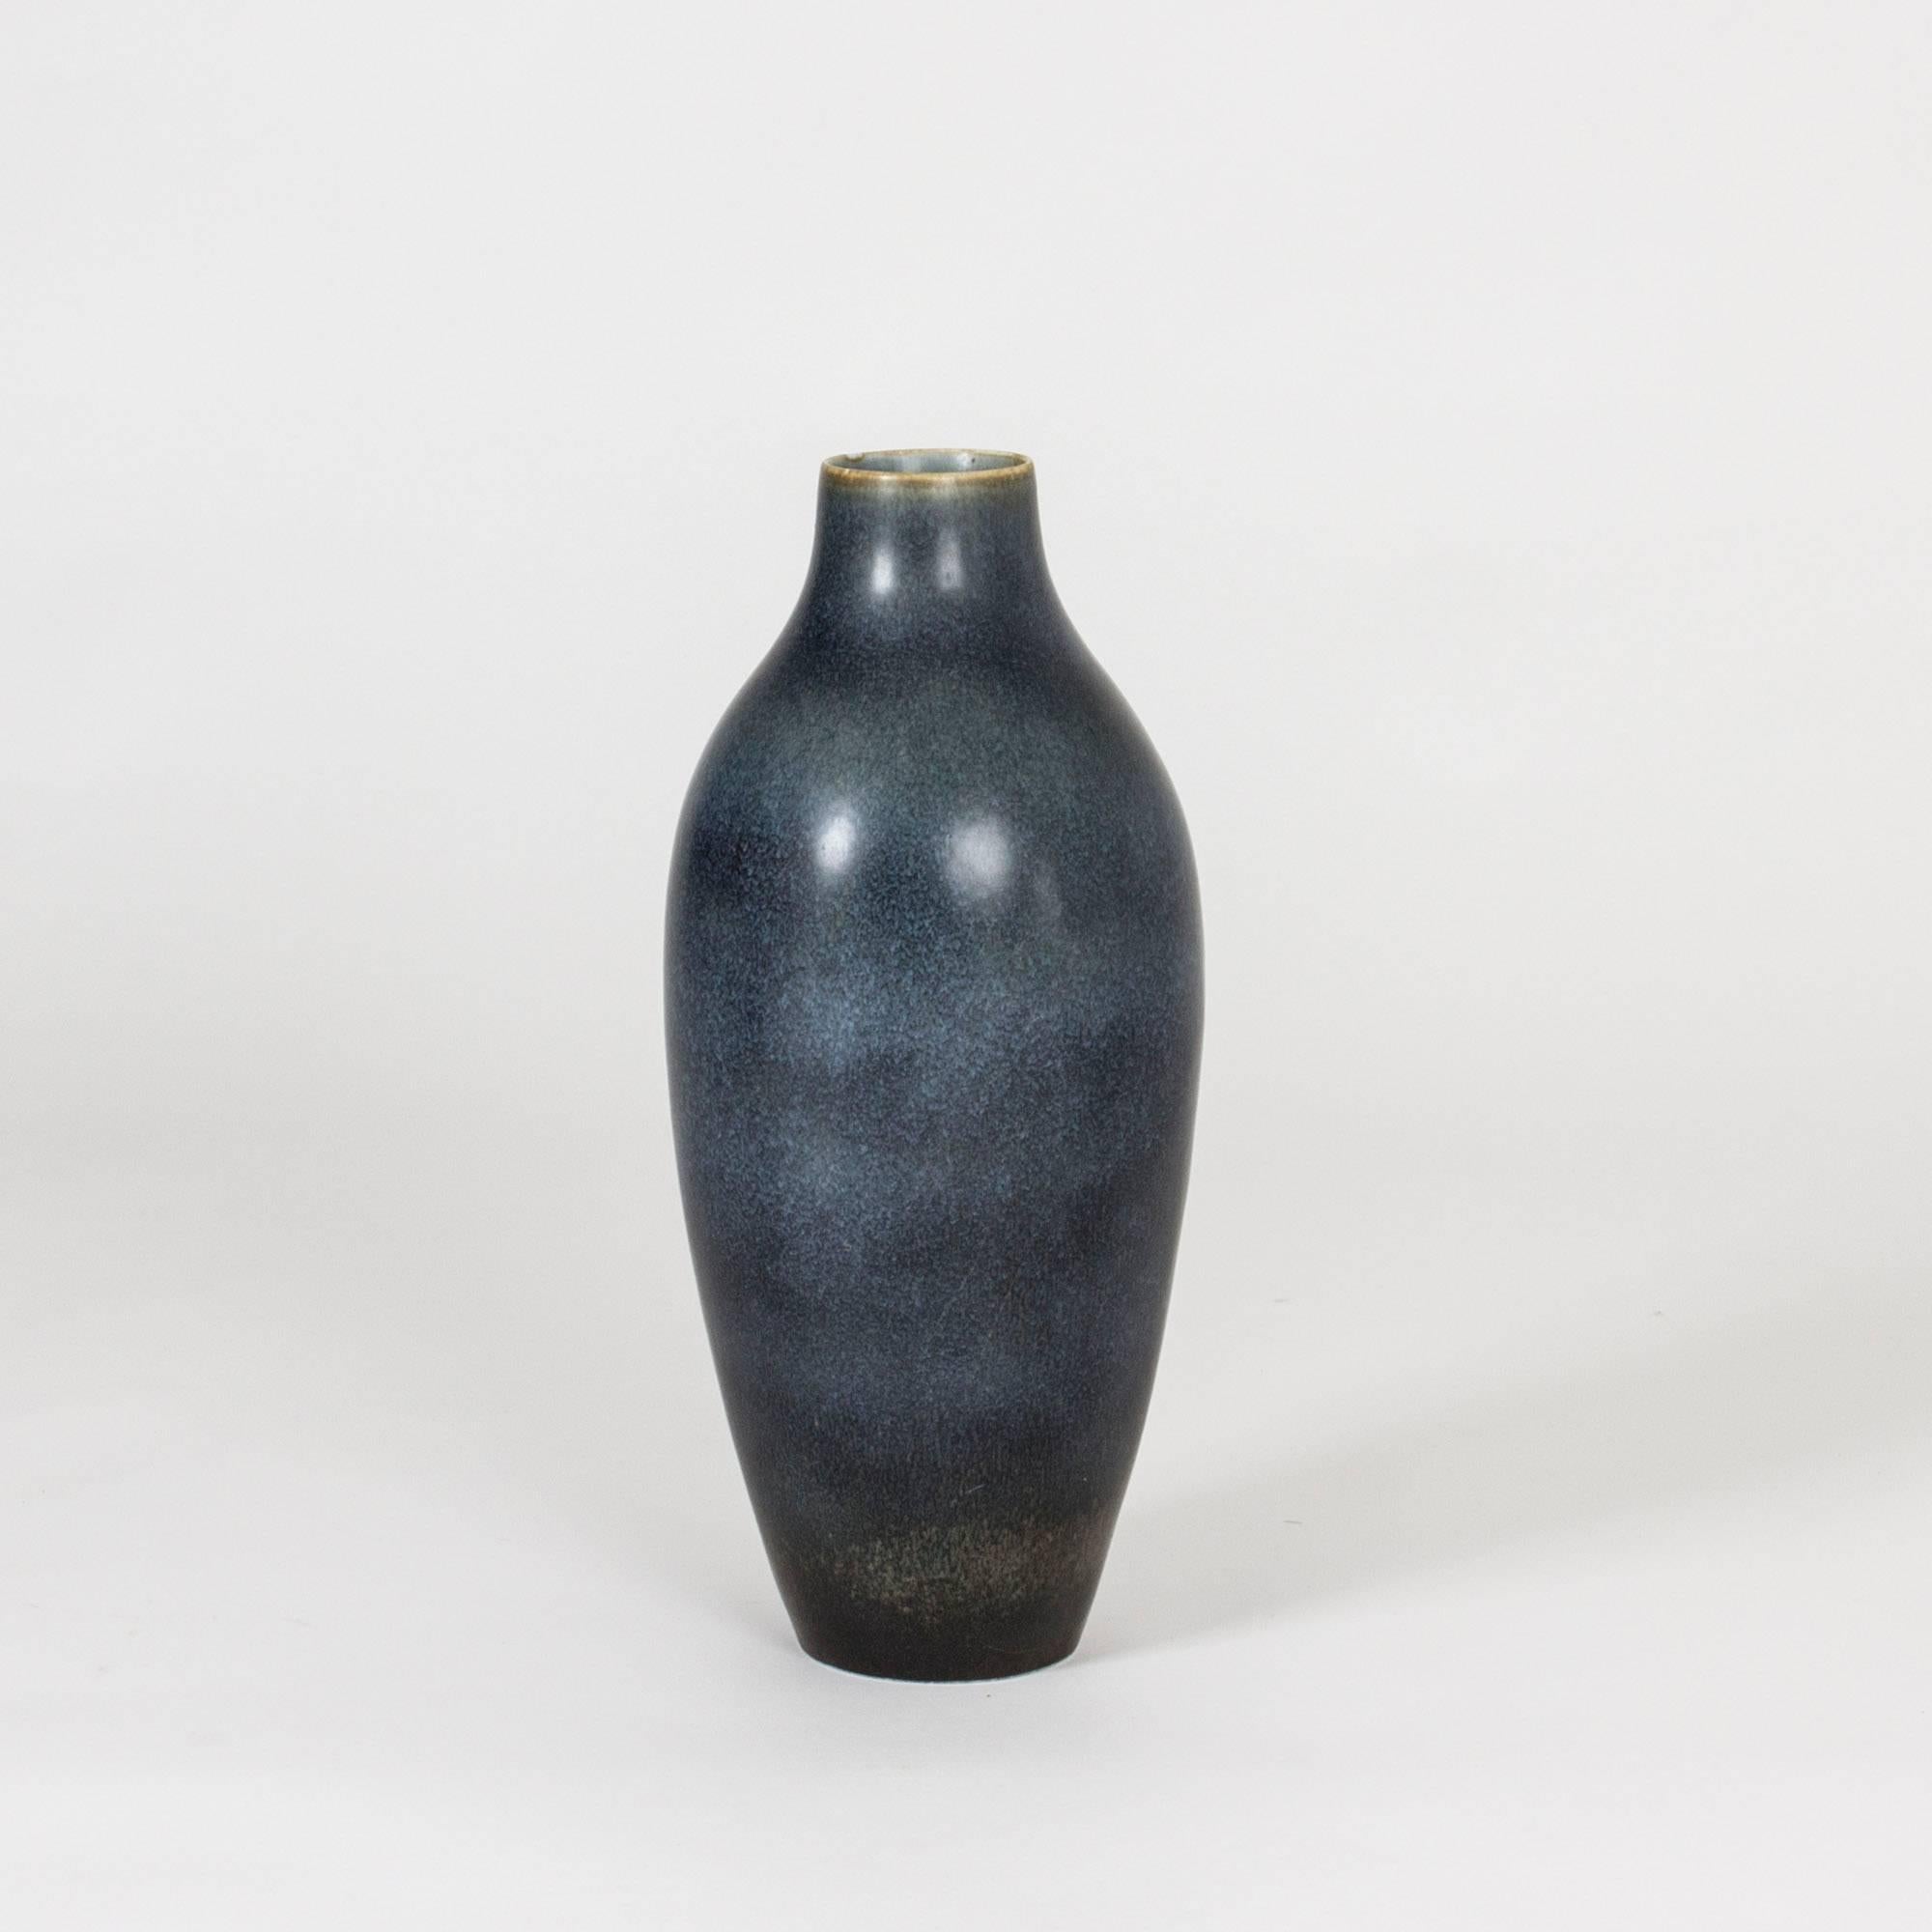 Statuesque stoneware floor vase by Carl-Harry Stålhane, in a simple shape with beautiful dark blue hare’s fur glaze.